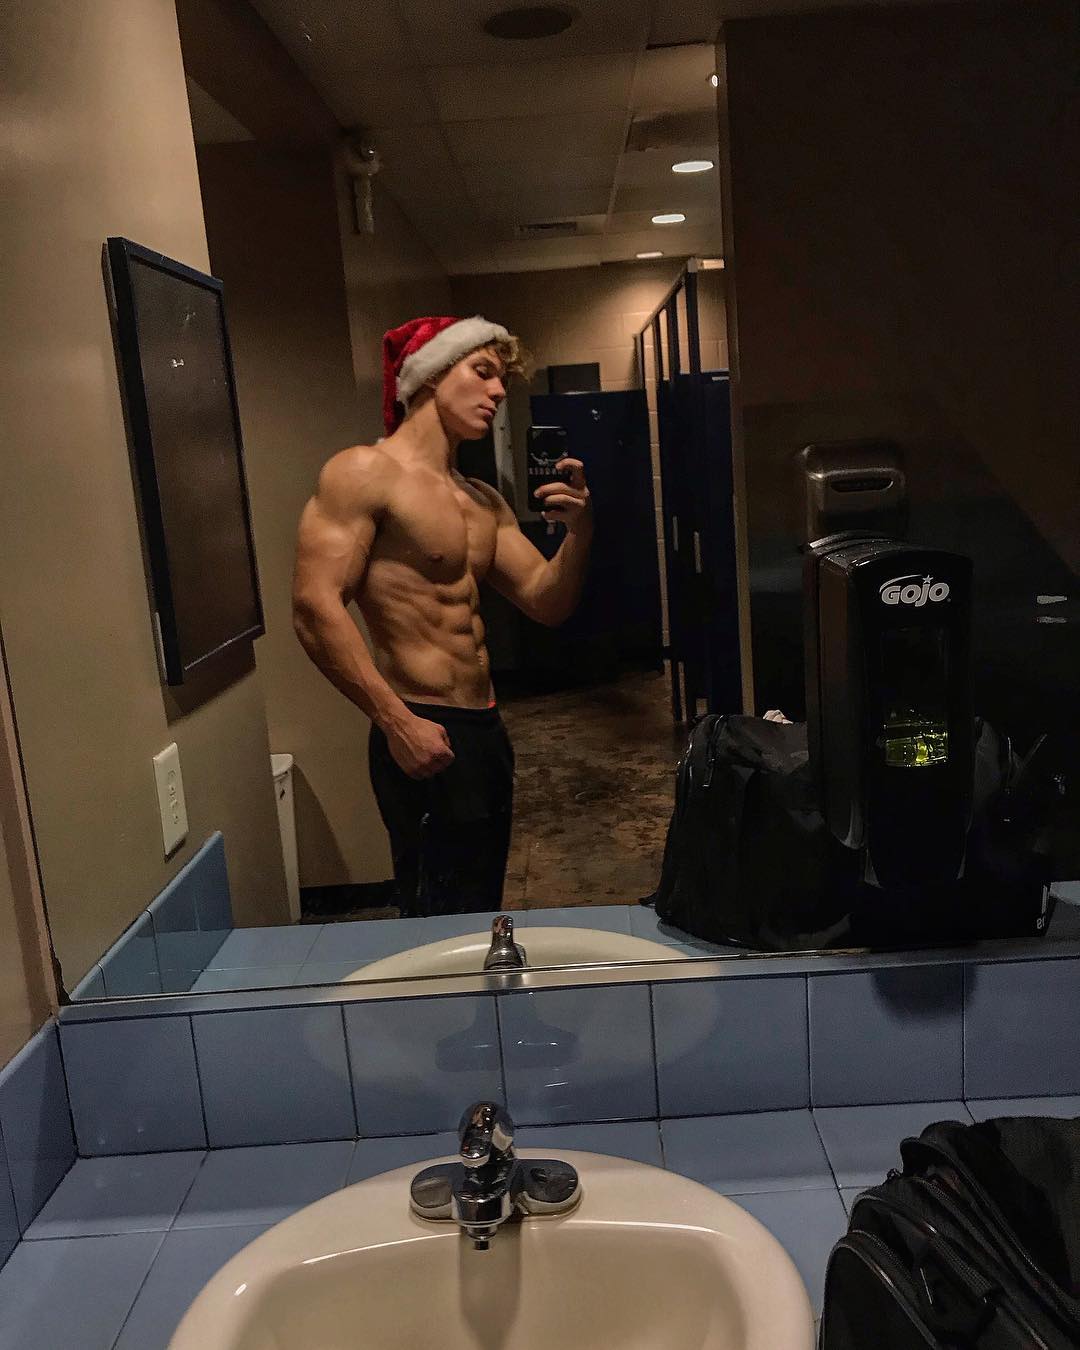 cute-christmas-guy-shirtless-fit-body-ripped-sixpack-abs-riser-joseph-young-sexy-santa-claus-straight-baited-selfie